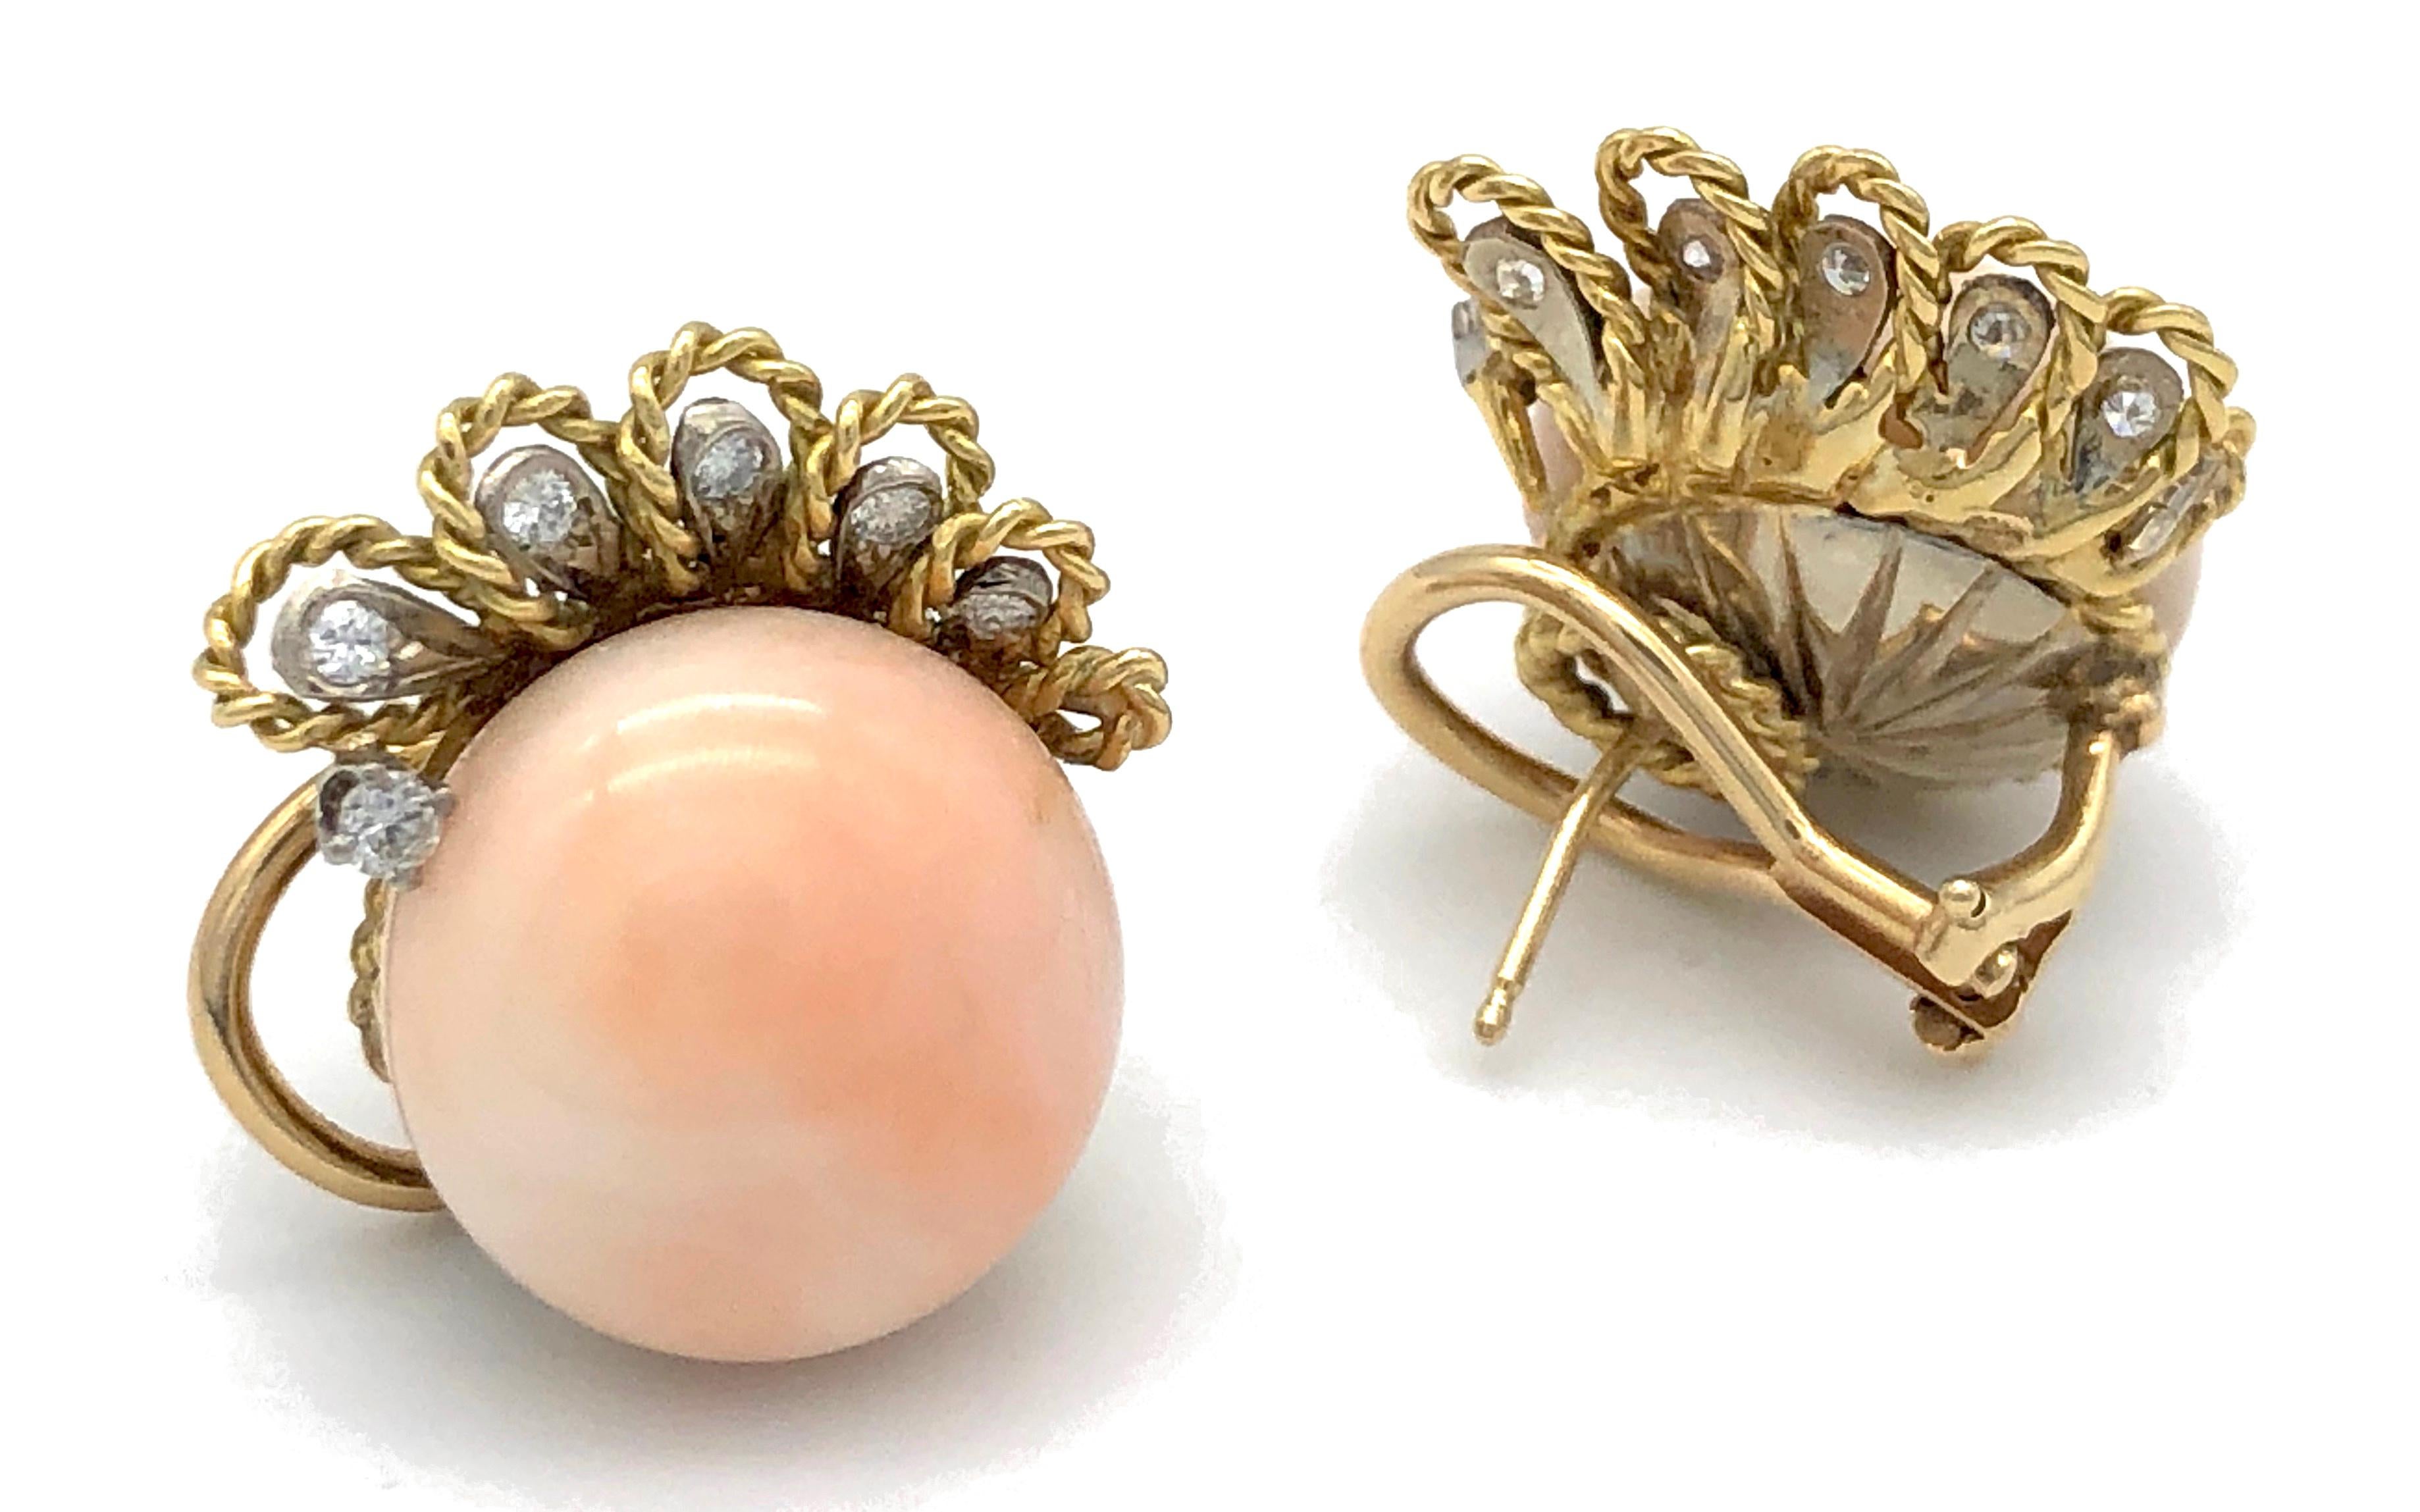 This pair of earclips features wonderful pink coral boutons mounted on 18k gold. 
Each clip is decorated with six platinum mounted diamonds, five diamonds are surrounded by loops made of twisted gold wire.
At the moment one of the clips has a stud